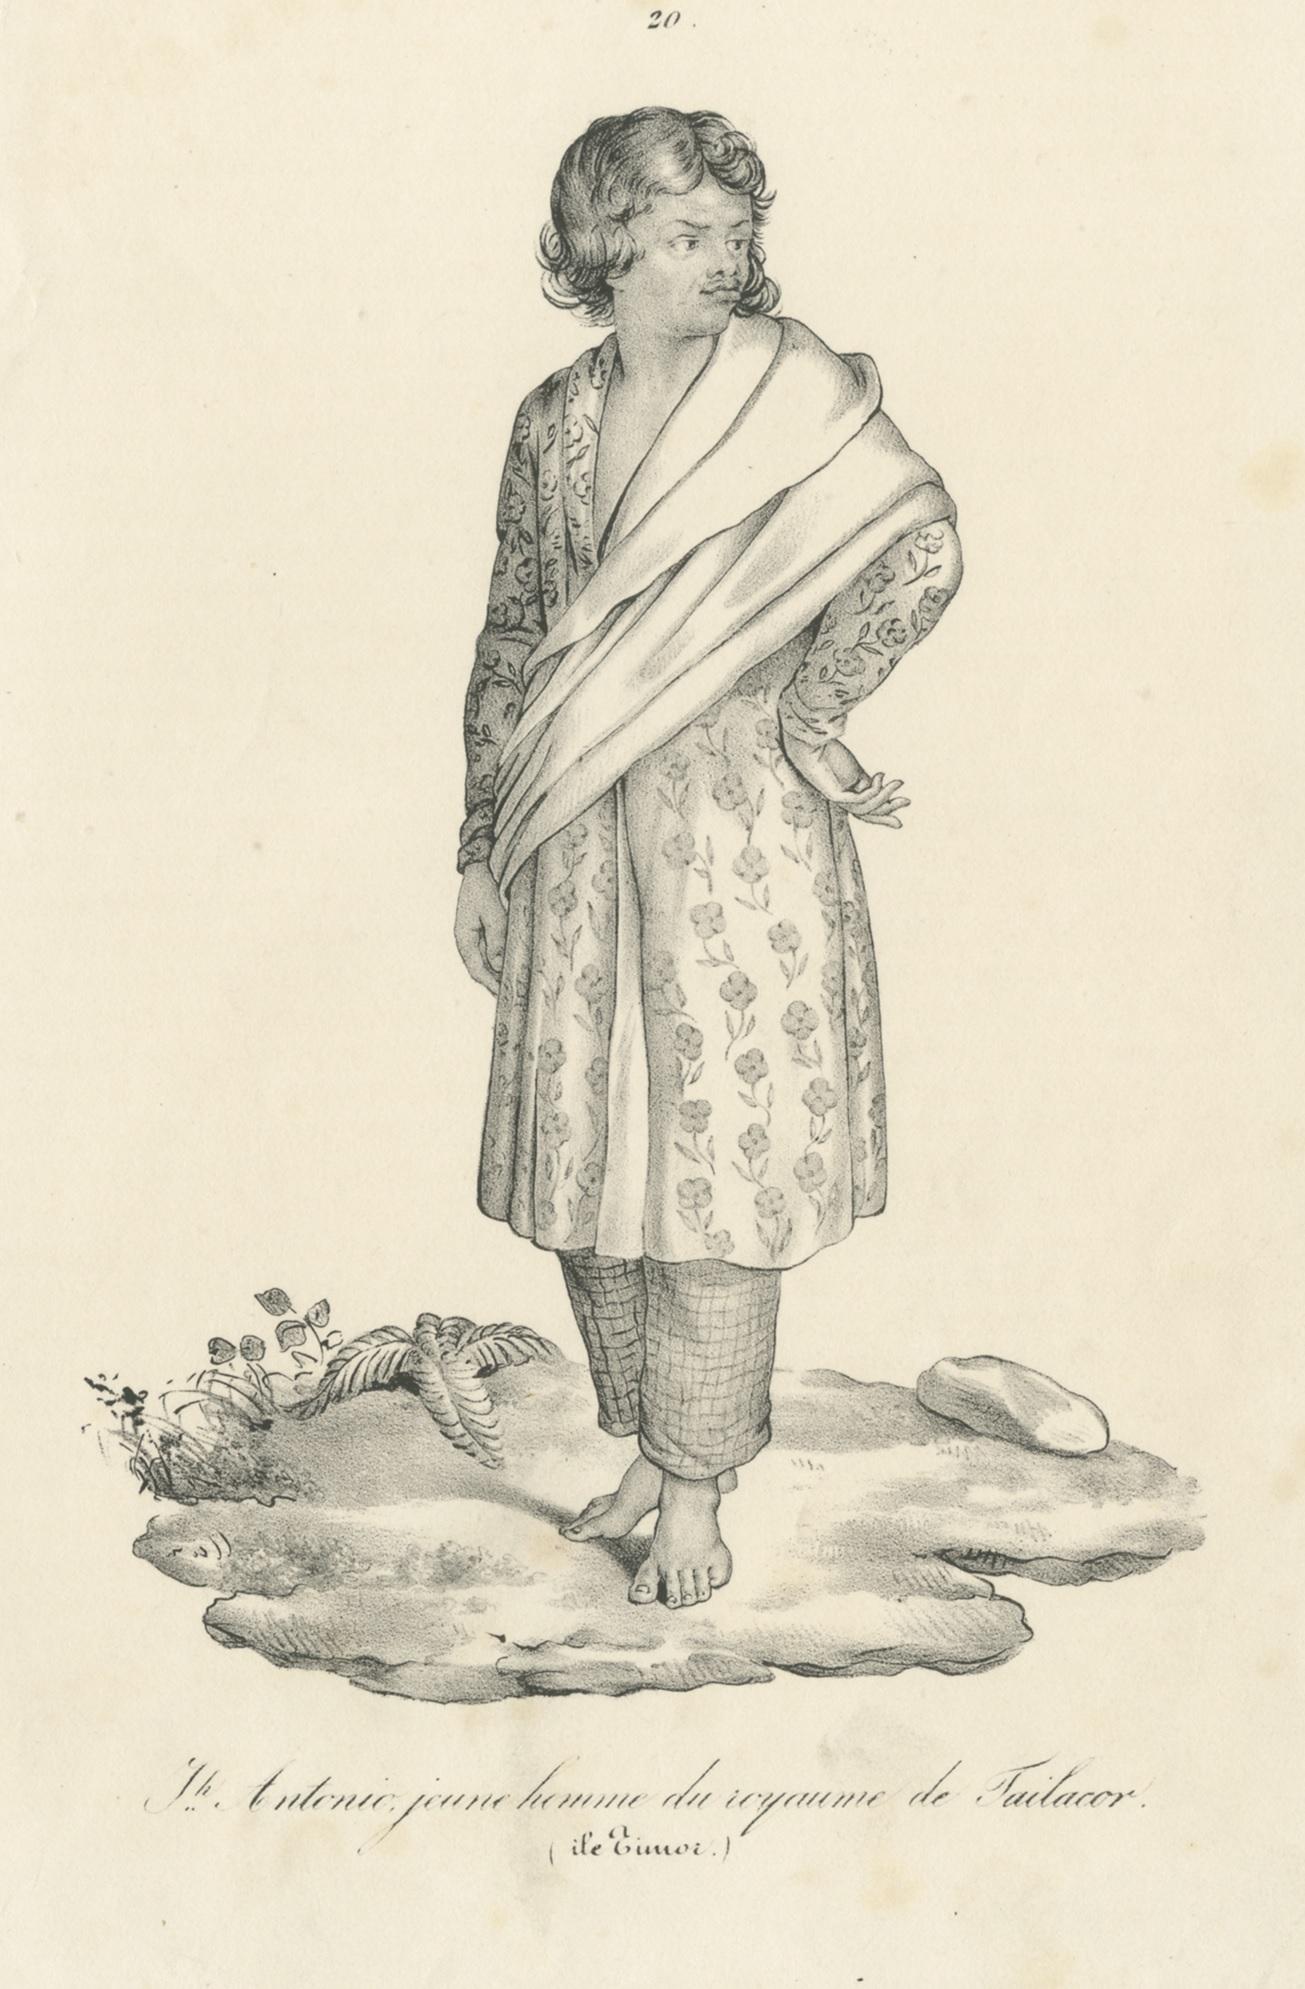 Antique print titled 'Antonio, jeune homme de royaume de Tailacor'. Lithograph of a native of Timor Island, Indonesia. Source unknown, to be determined. Published circa 1840.